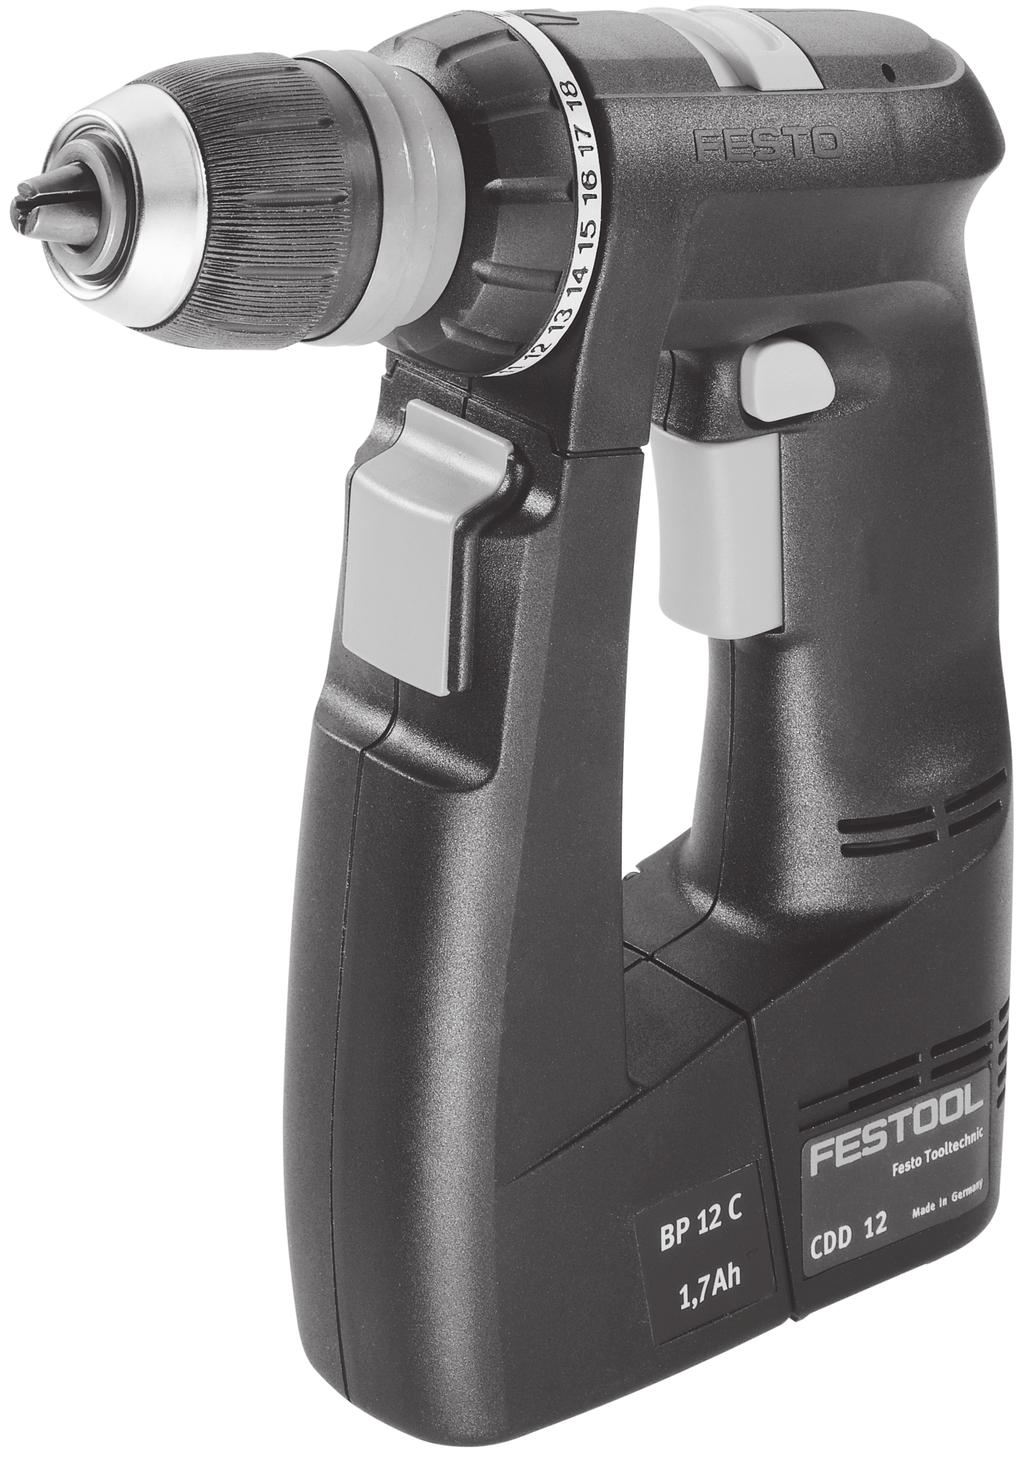 CDD 9.6 FX CDD 12 FX Cordless Drill / Screwdriver Instruction manual Page 4 IMPORTANT: Read and understand all instructions before using.